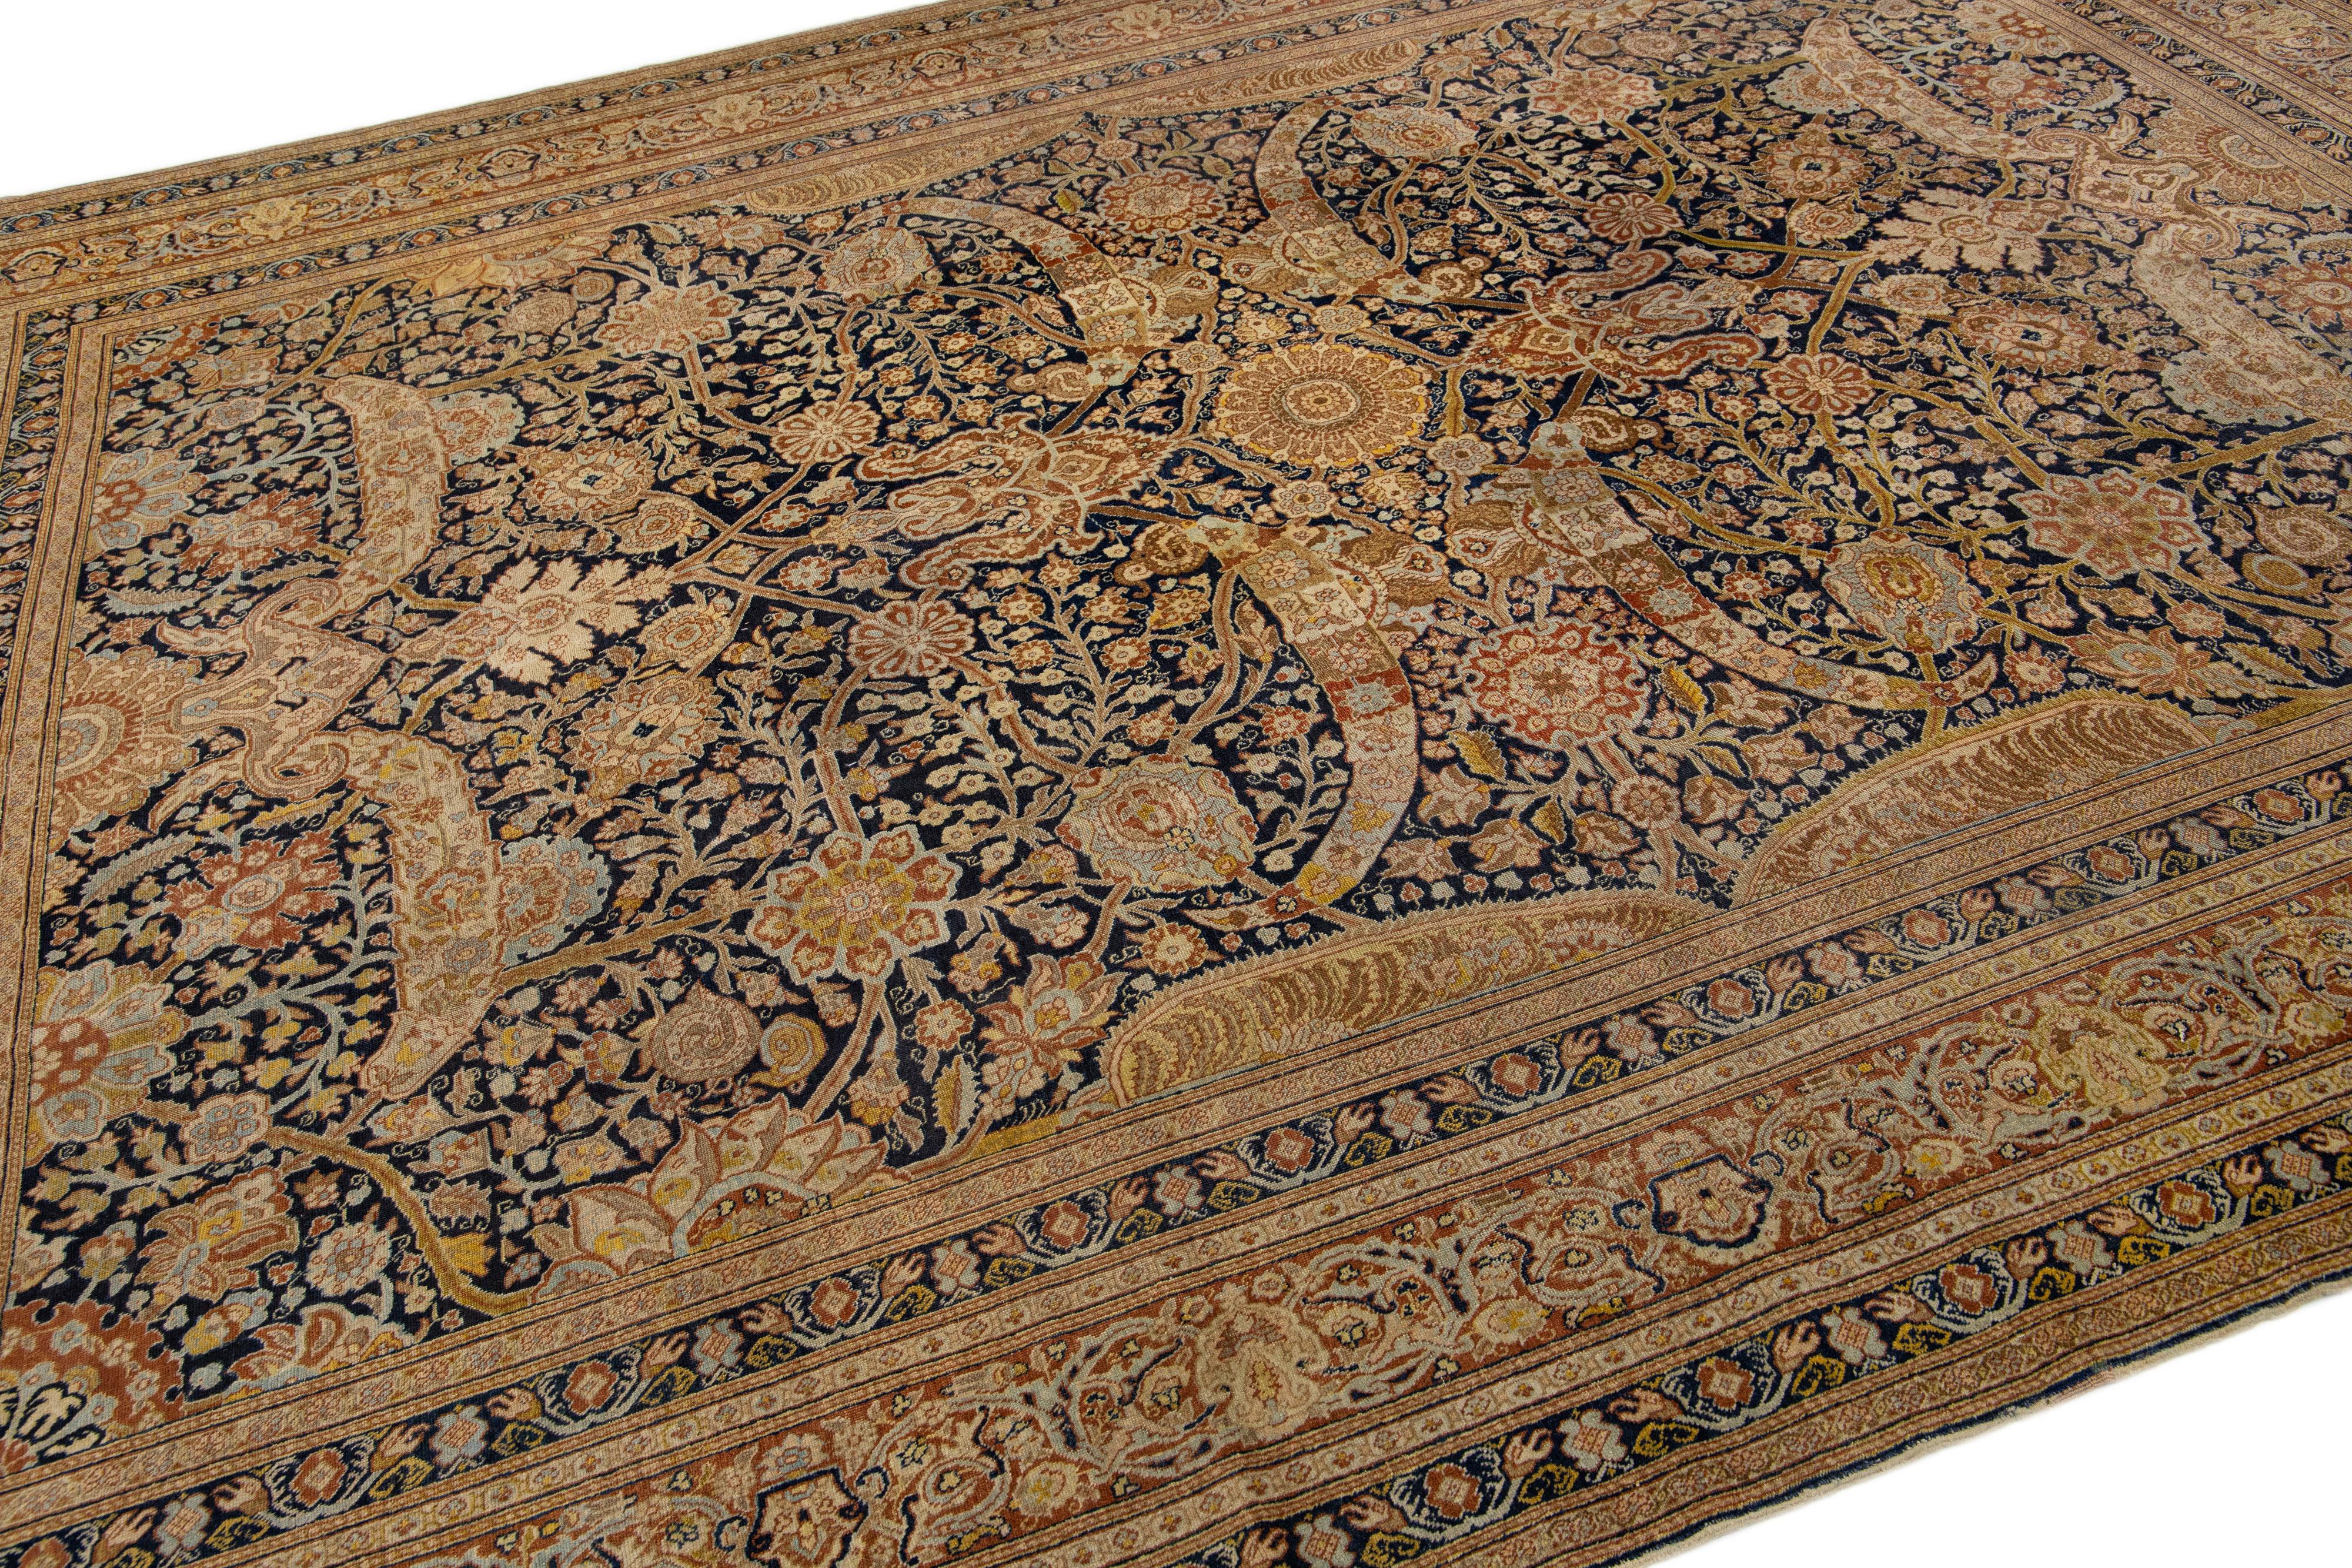 19th Century Handmade Antique Persian Tabriz Blue Wool Rug In Good Condition For Sale In Norwalk, CT